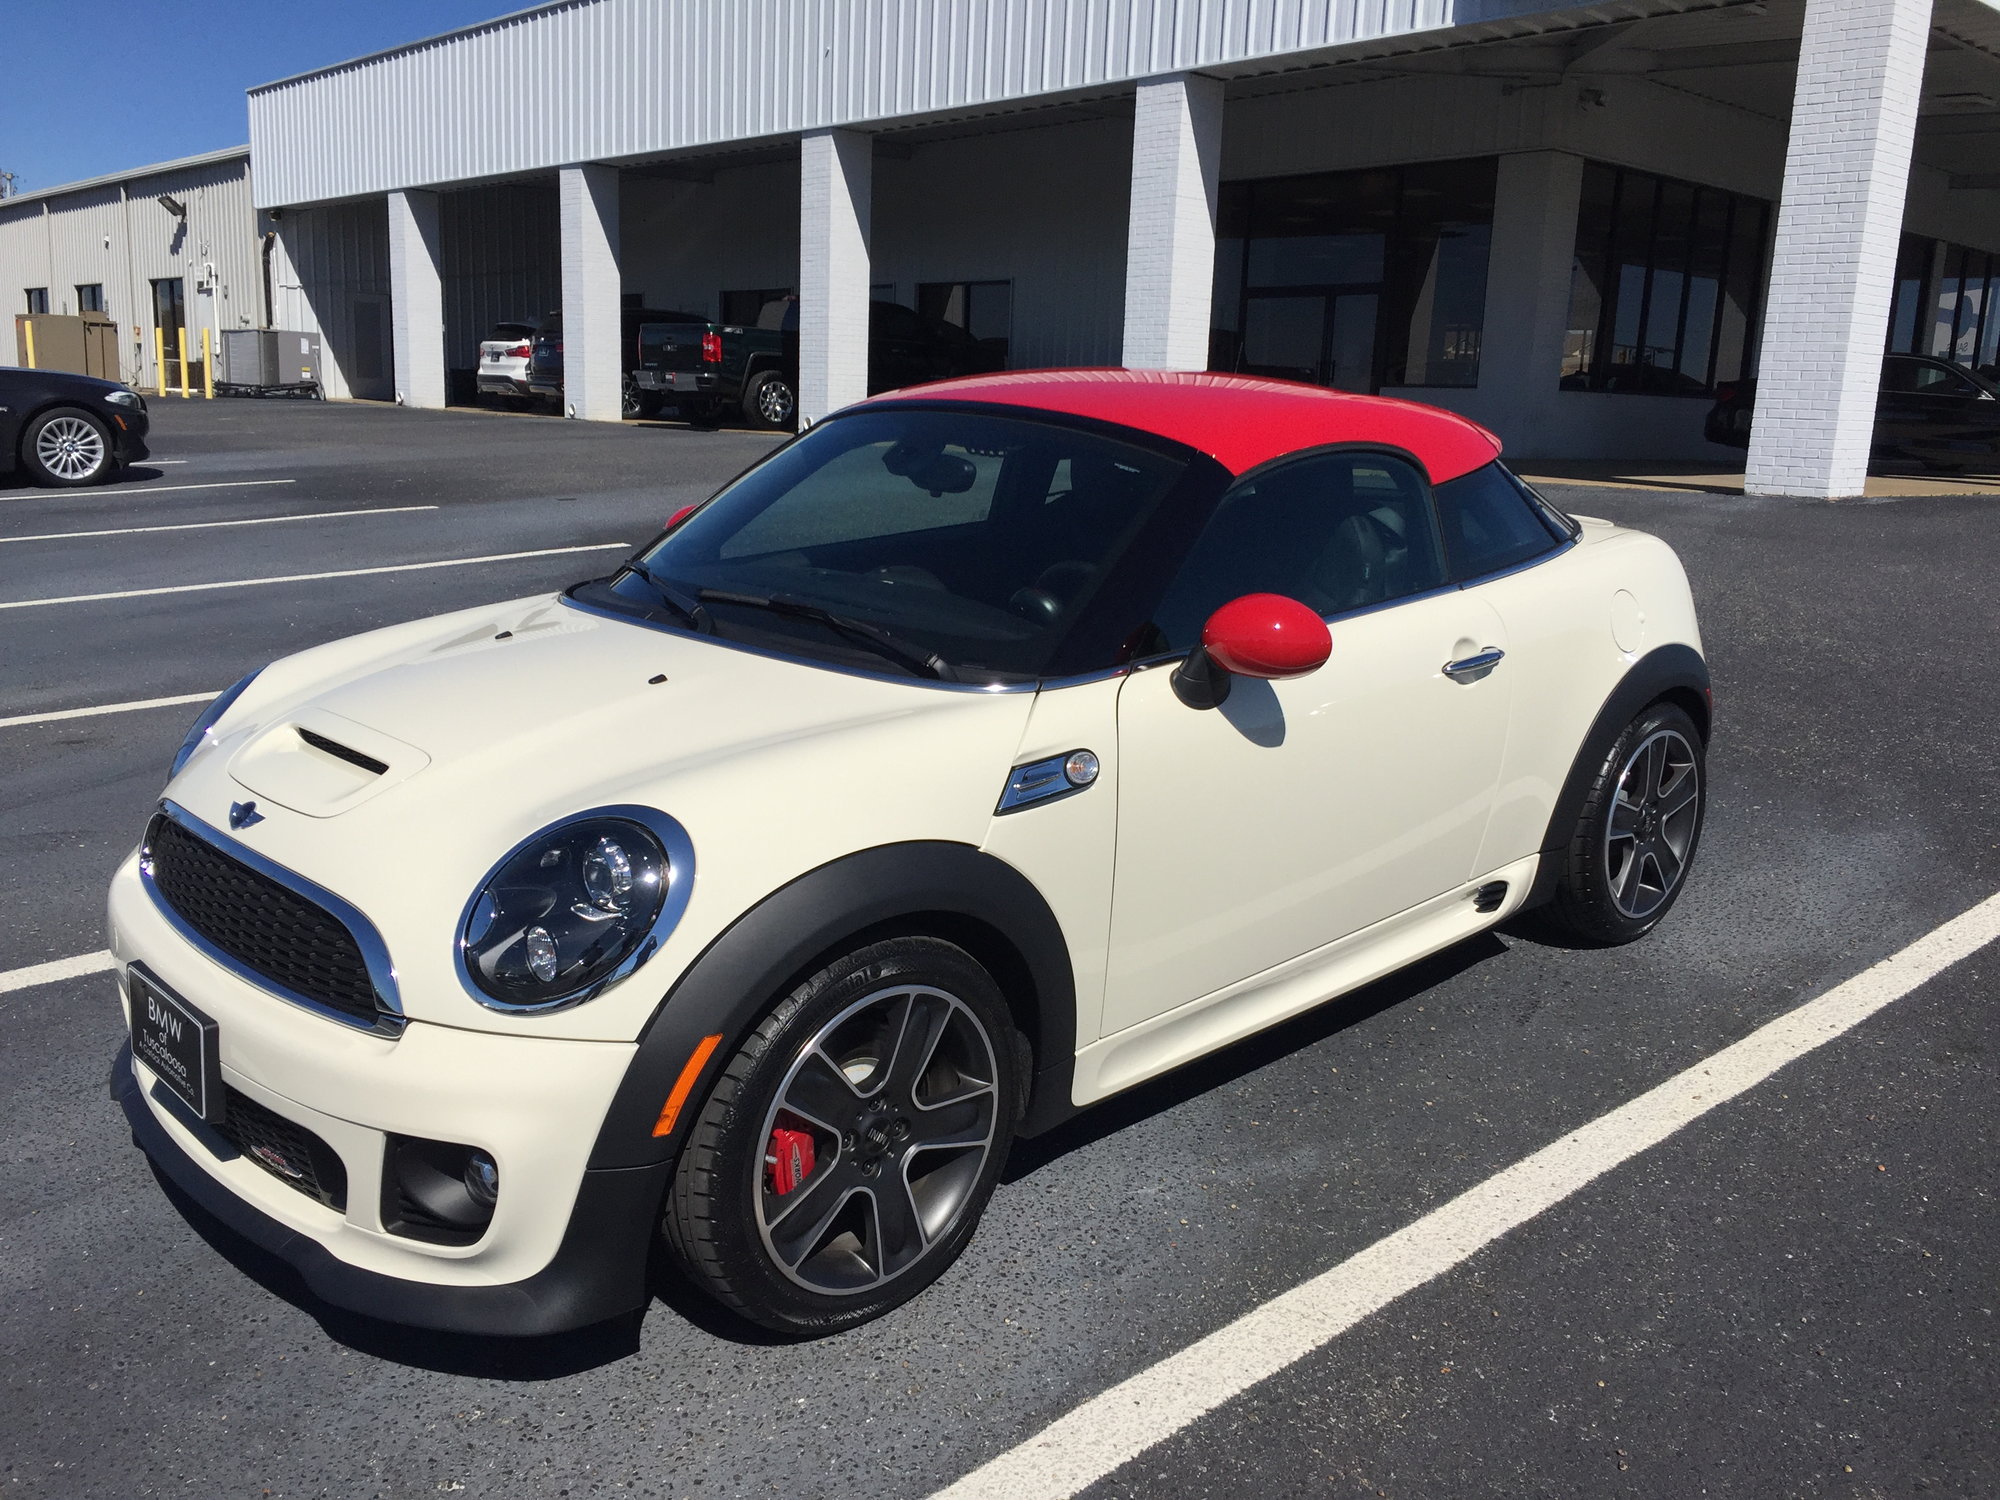 R58 Good price for a 2015 Mini Cooper Coupe JCW? - North American Motoring